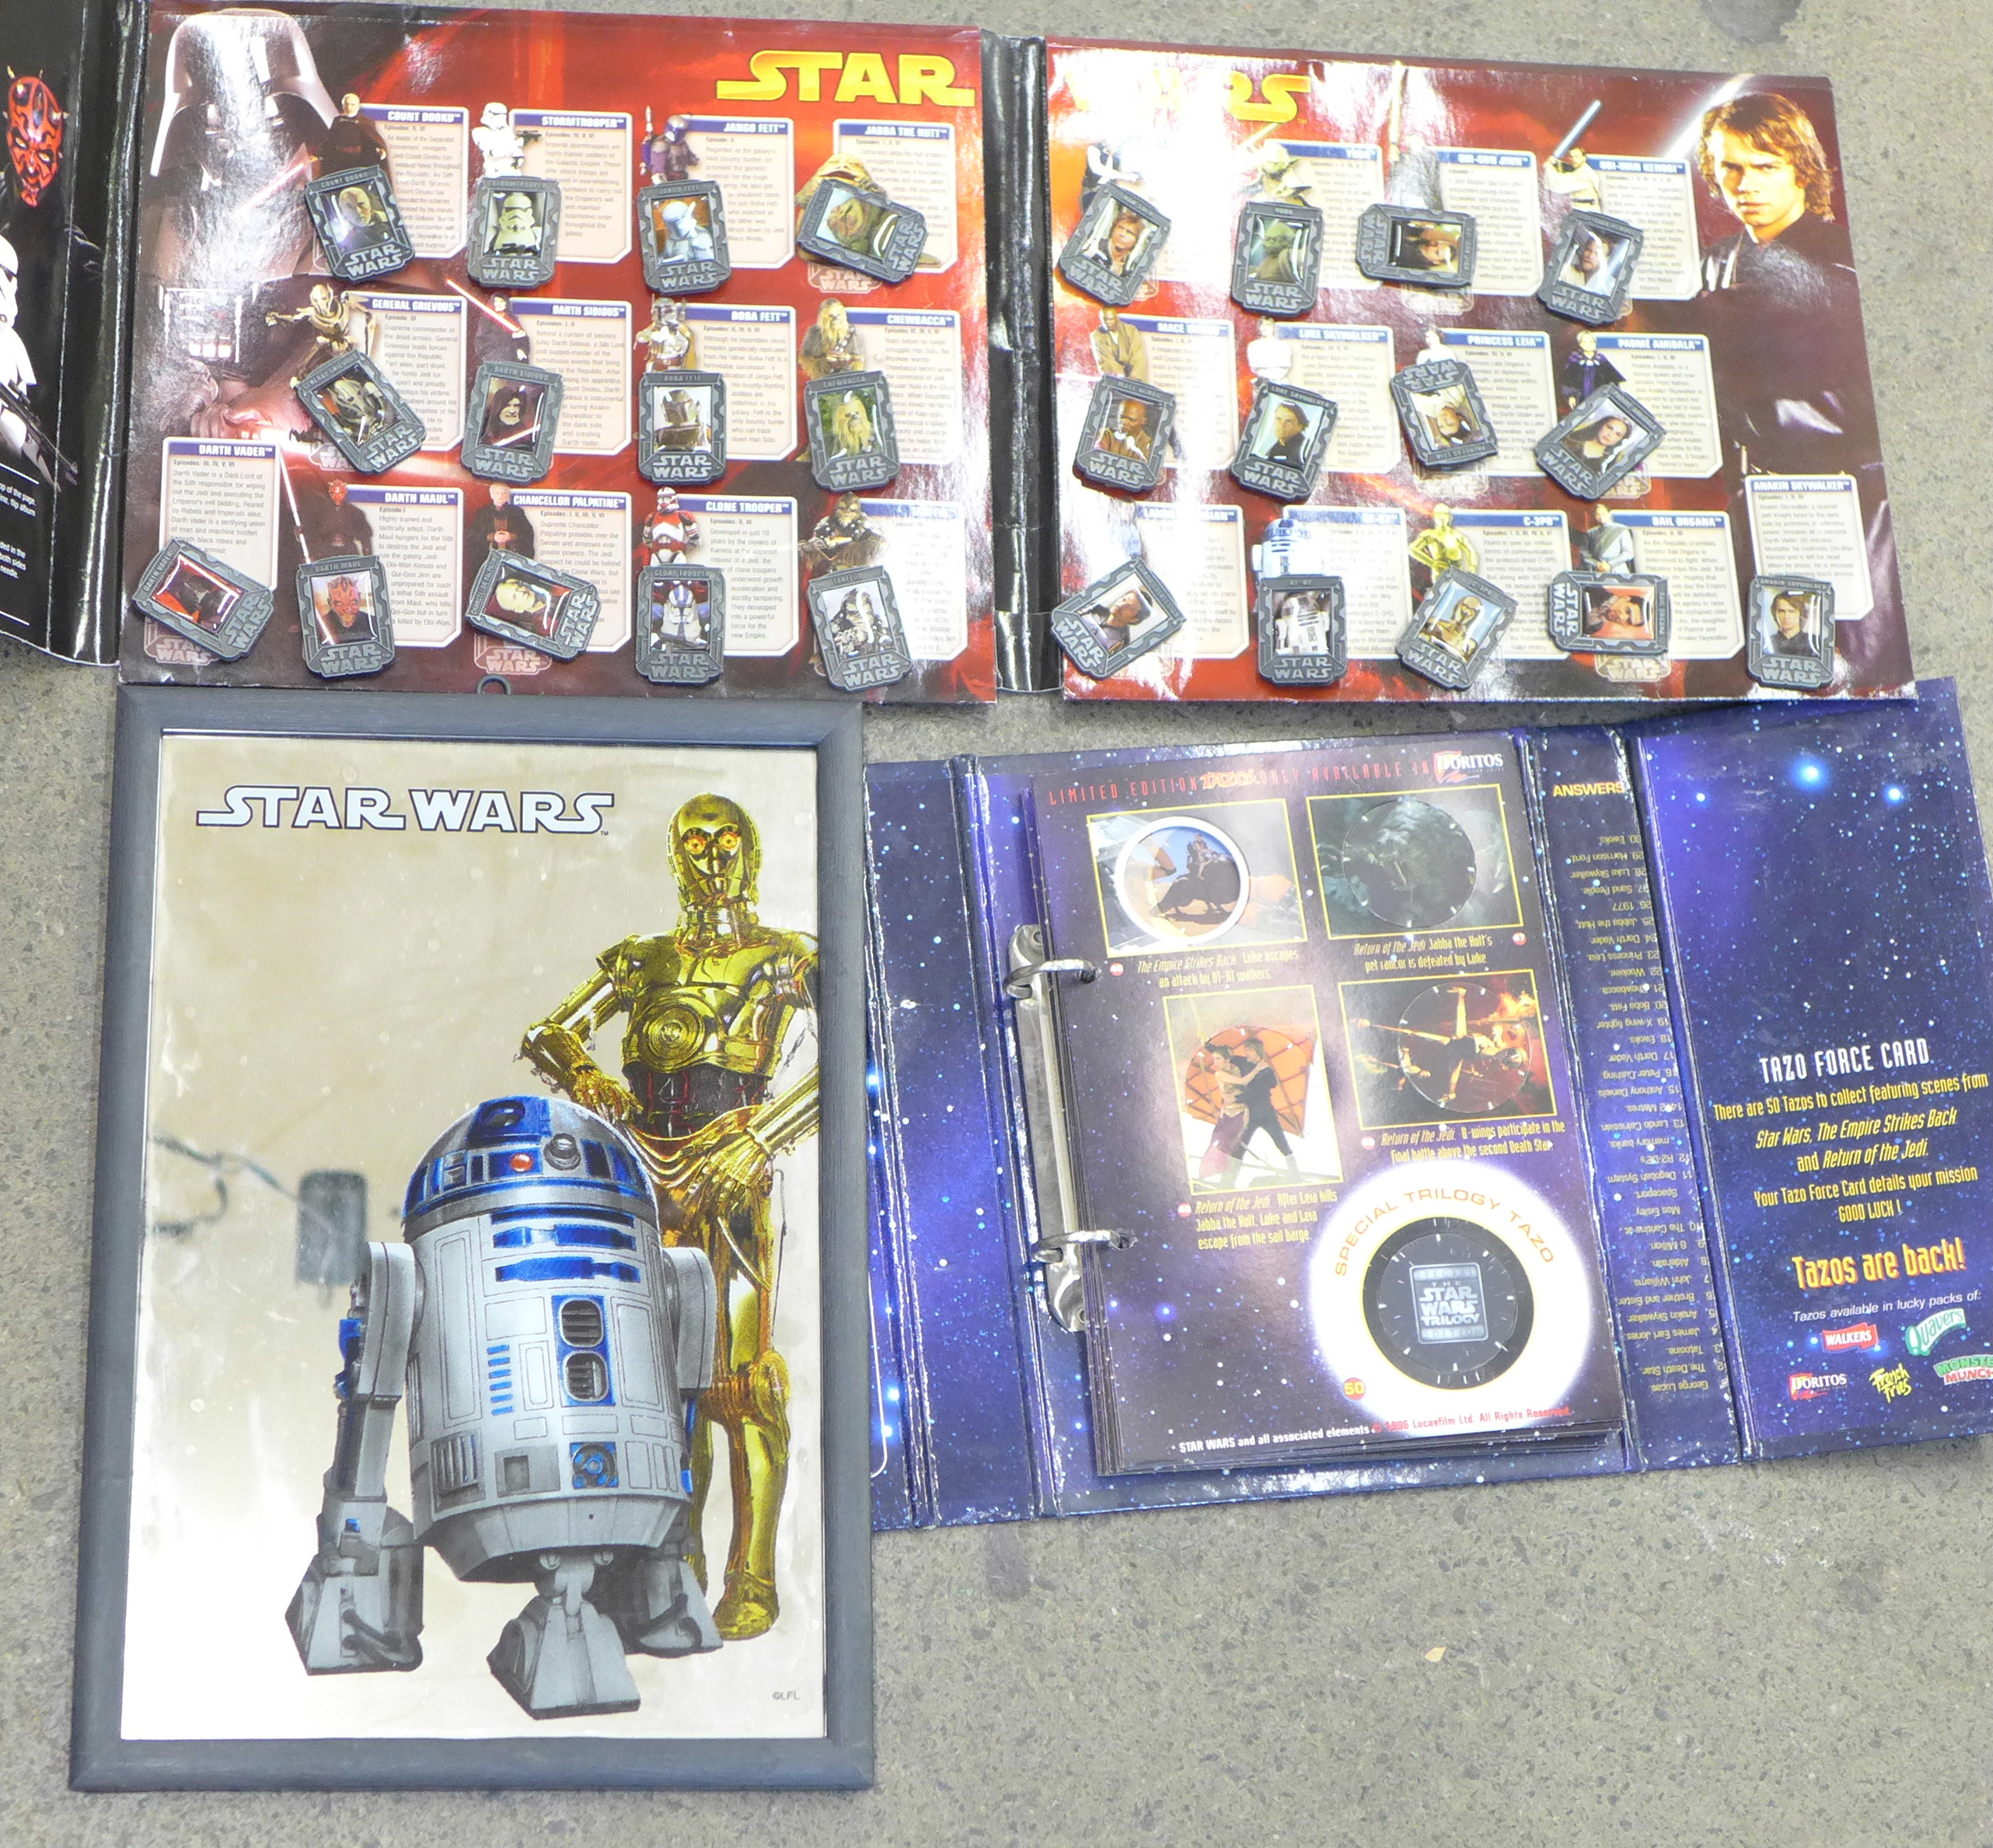 Star Wars Episode III 2005 pin badge collection, Star Wars Tazo pack and a Star Wars mirror